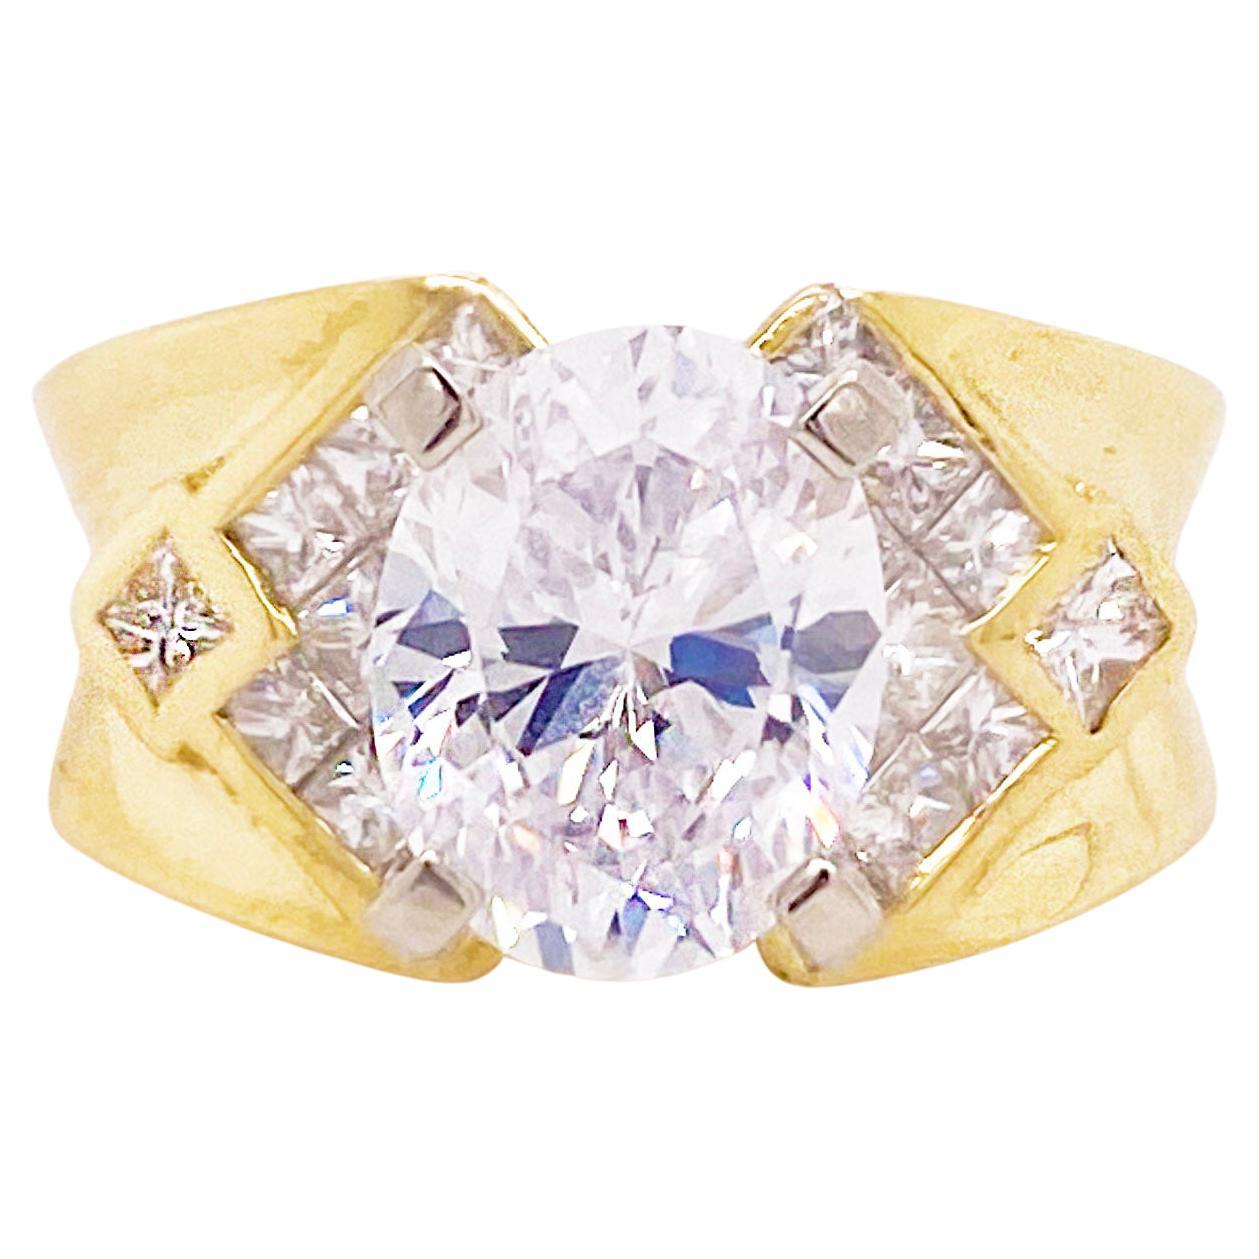 Diamond Engagement Semi-Mount with Oval Cubic Zirconia, 18K Gold, Vintage Style